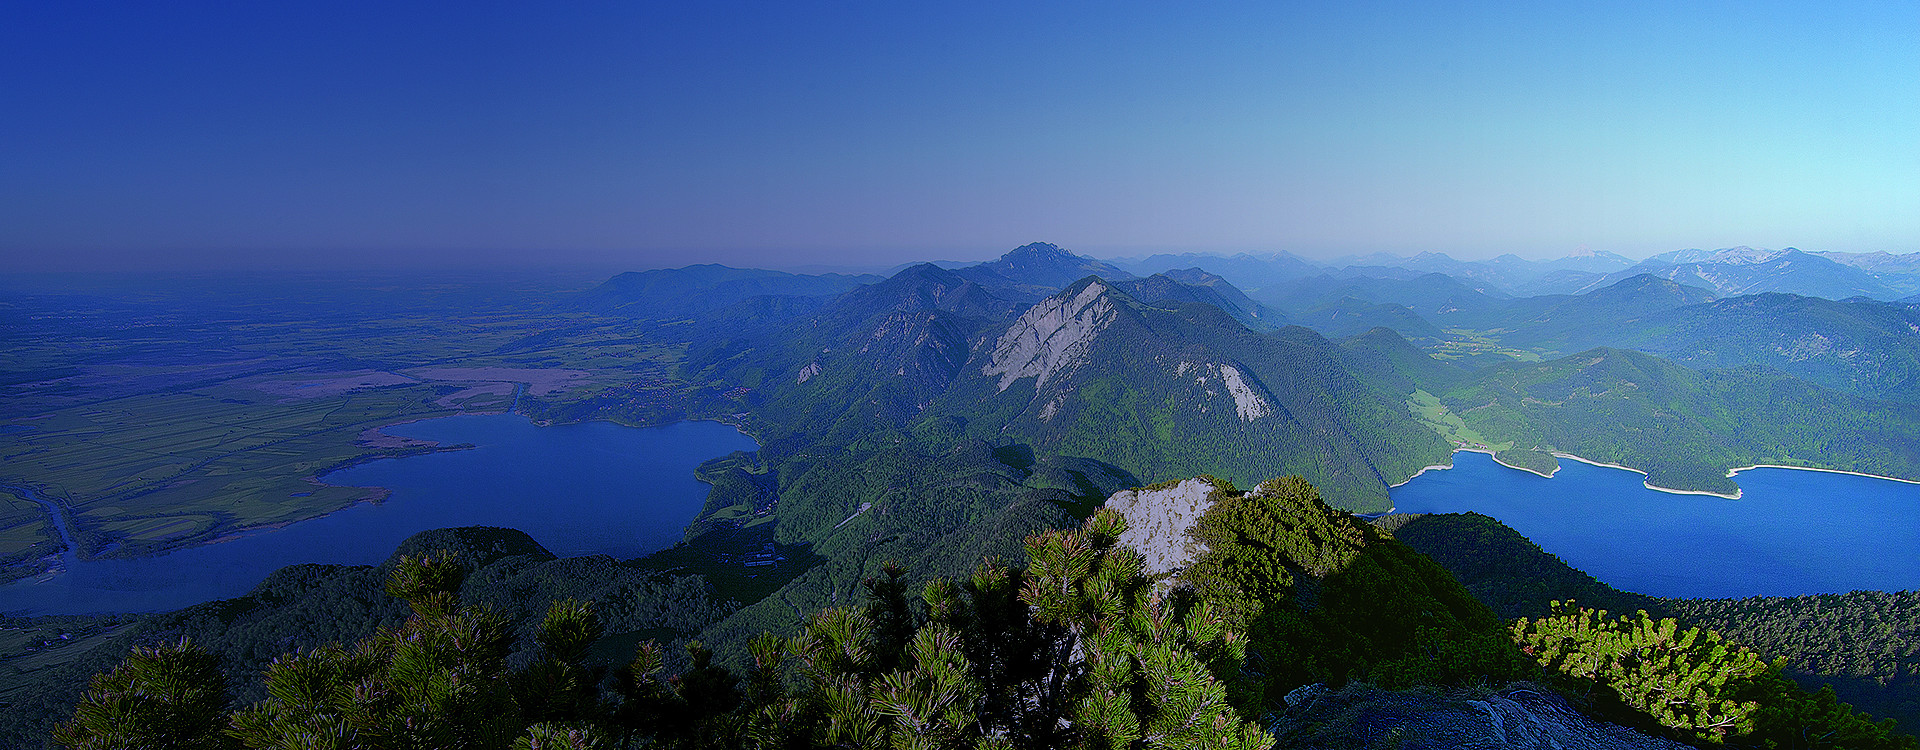 view from mountain herzogstand on kochelsee and walchensee